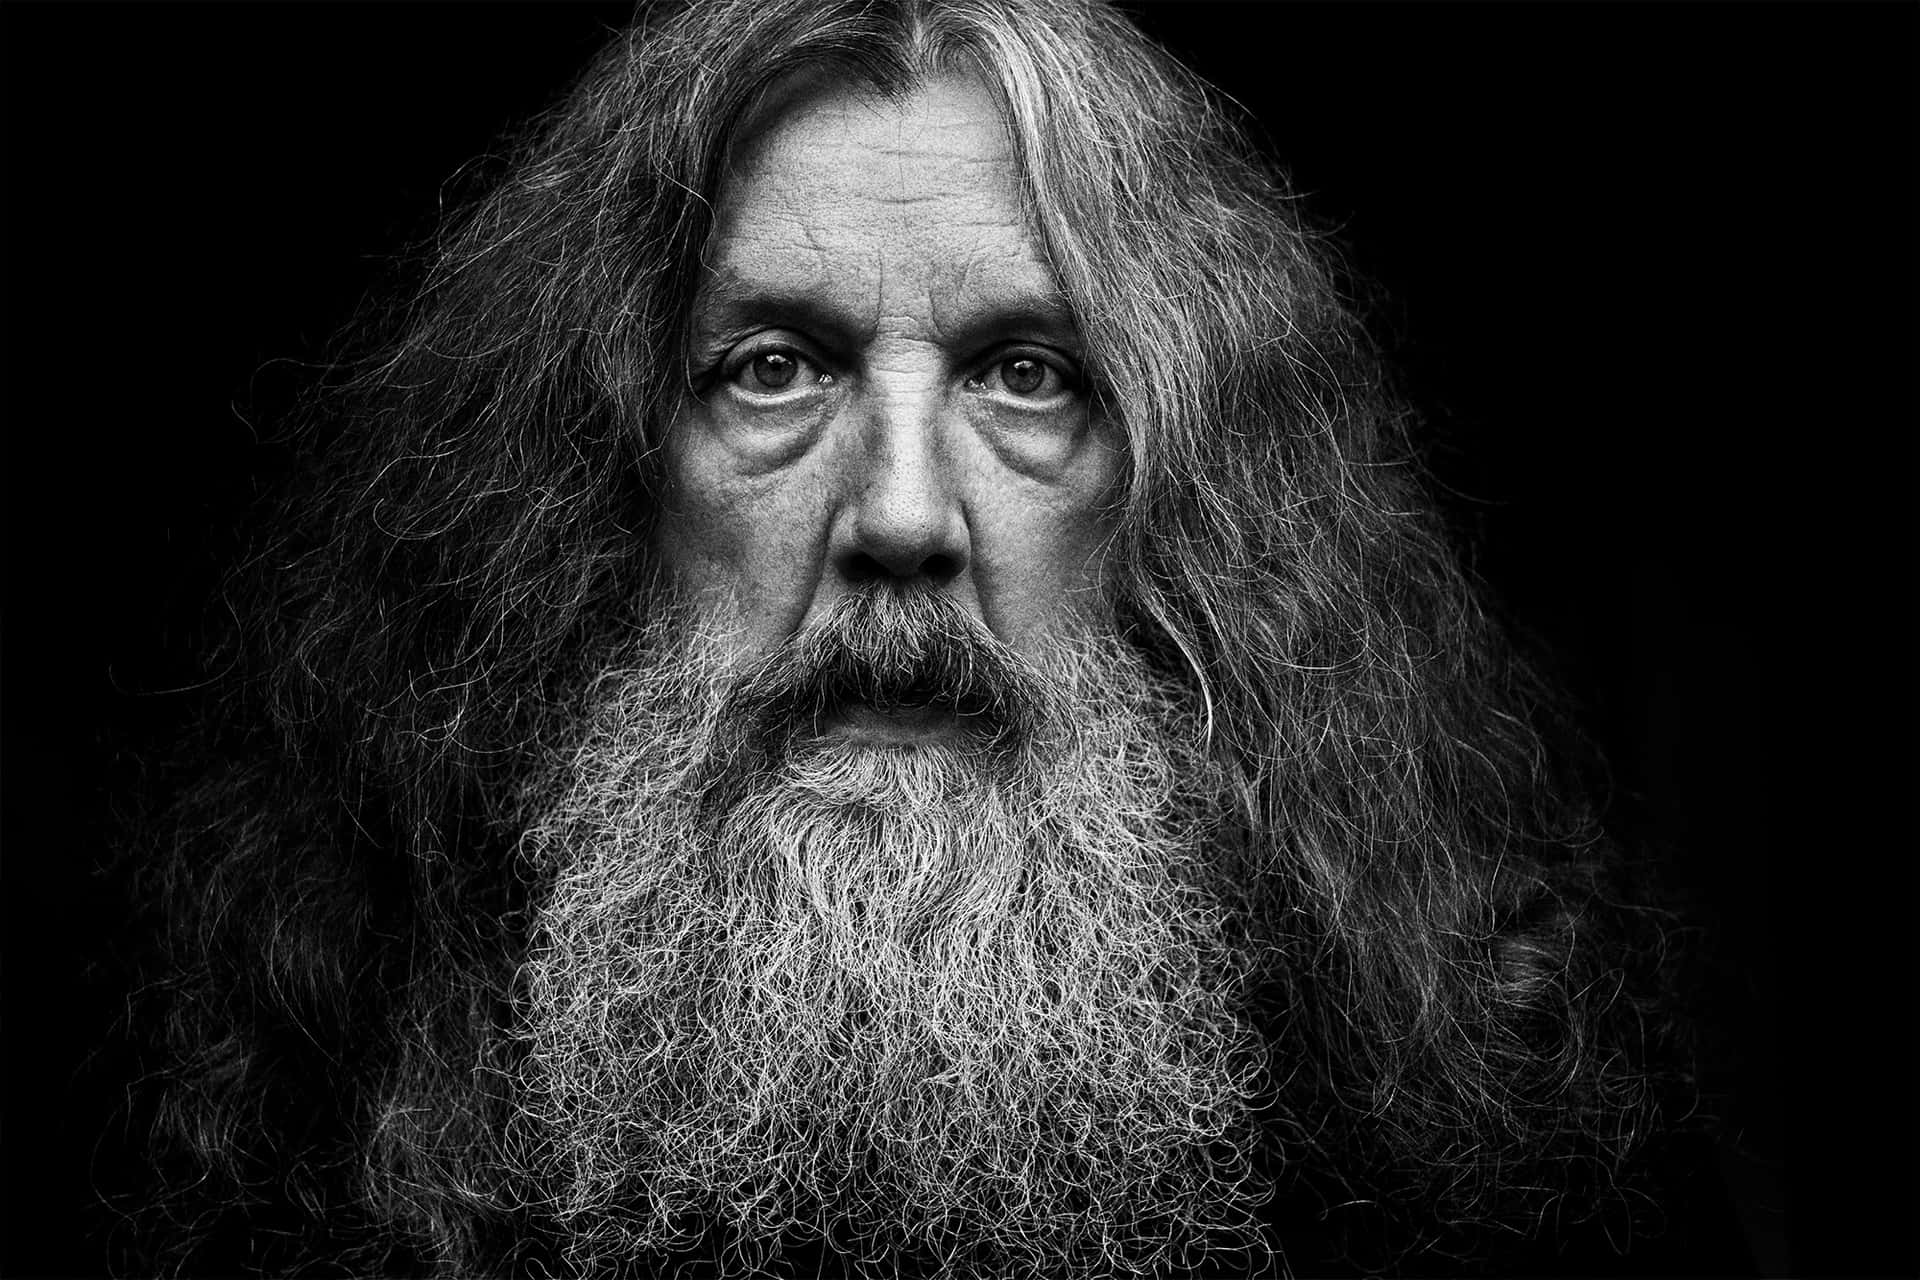 Renowned British comic book author Alan Moore at a public event Wallpaper